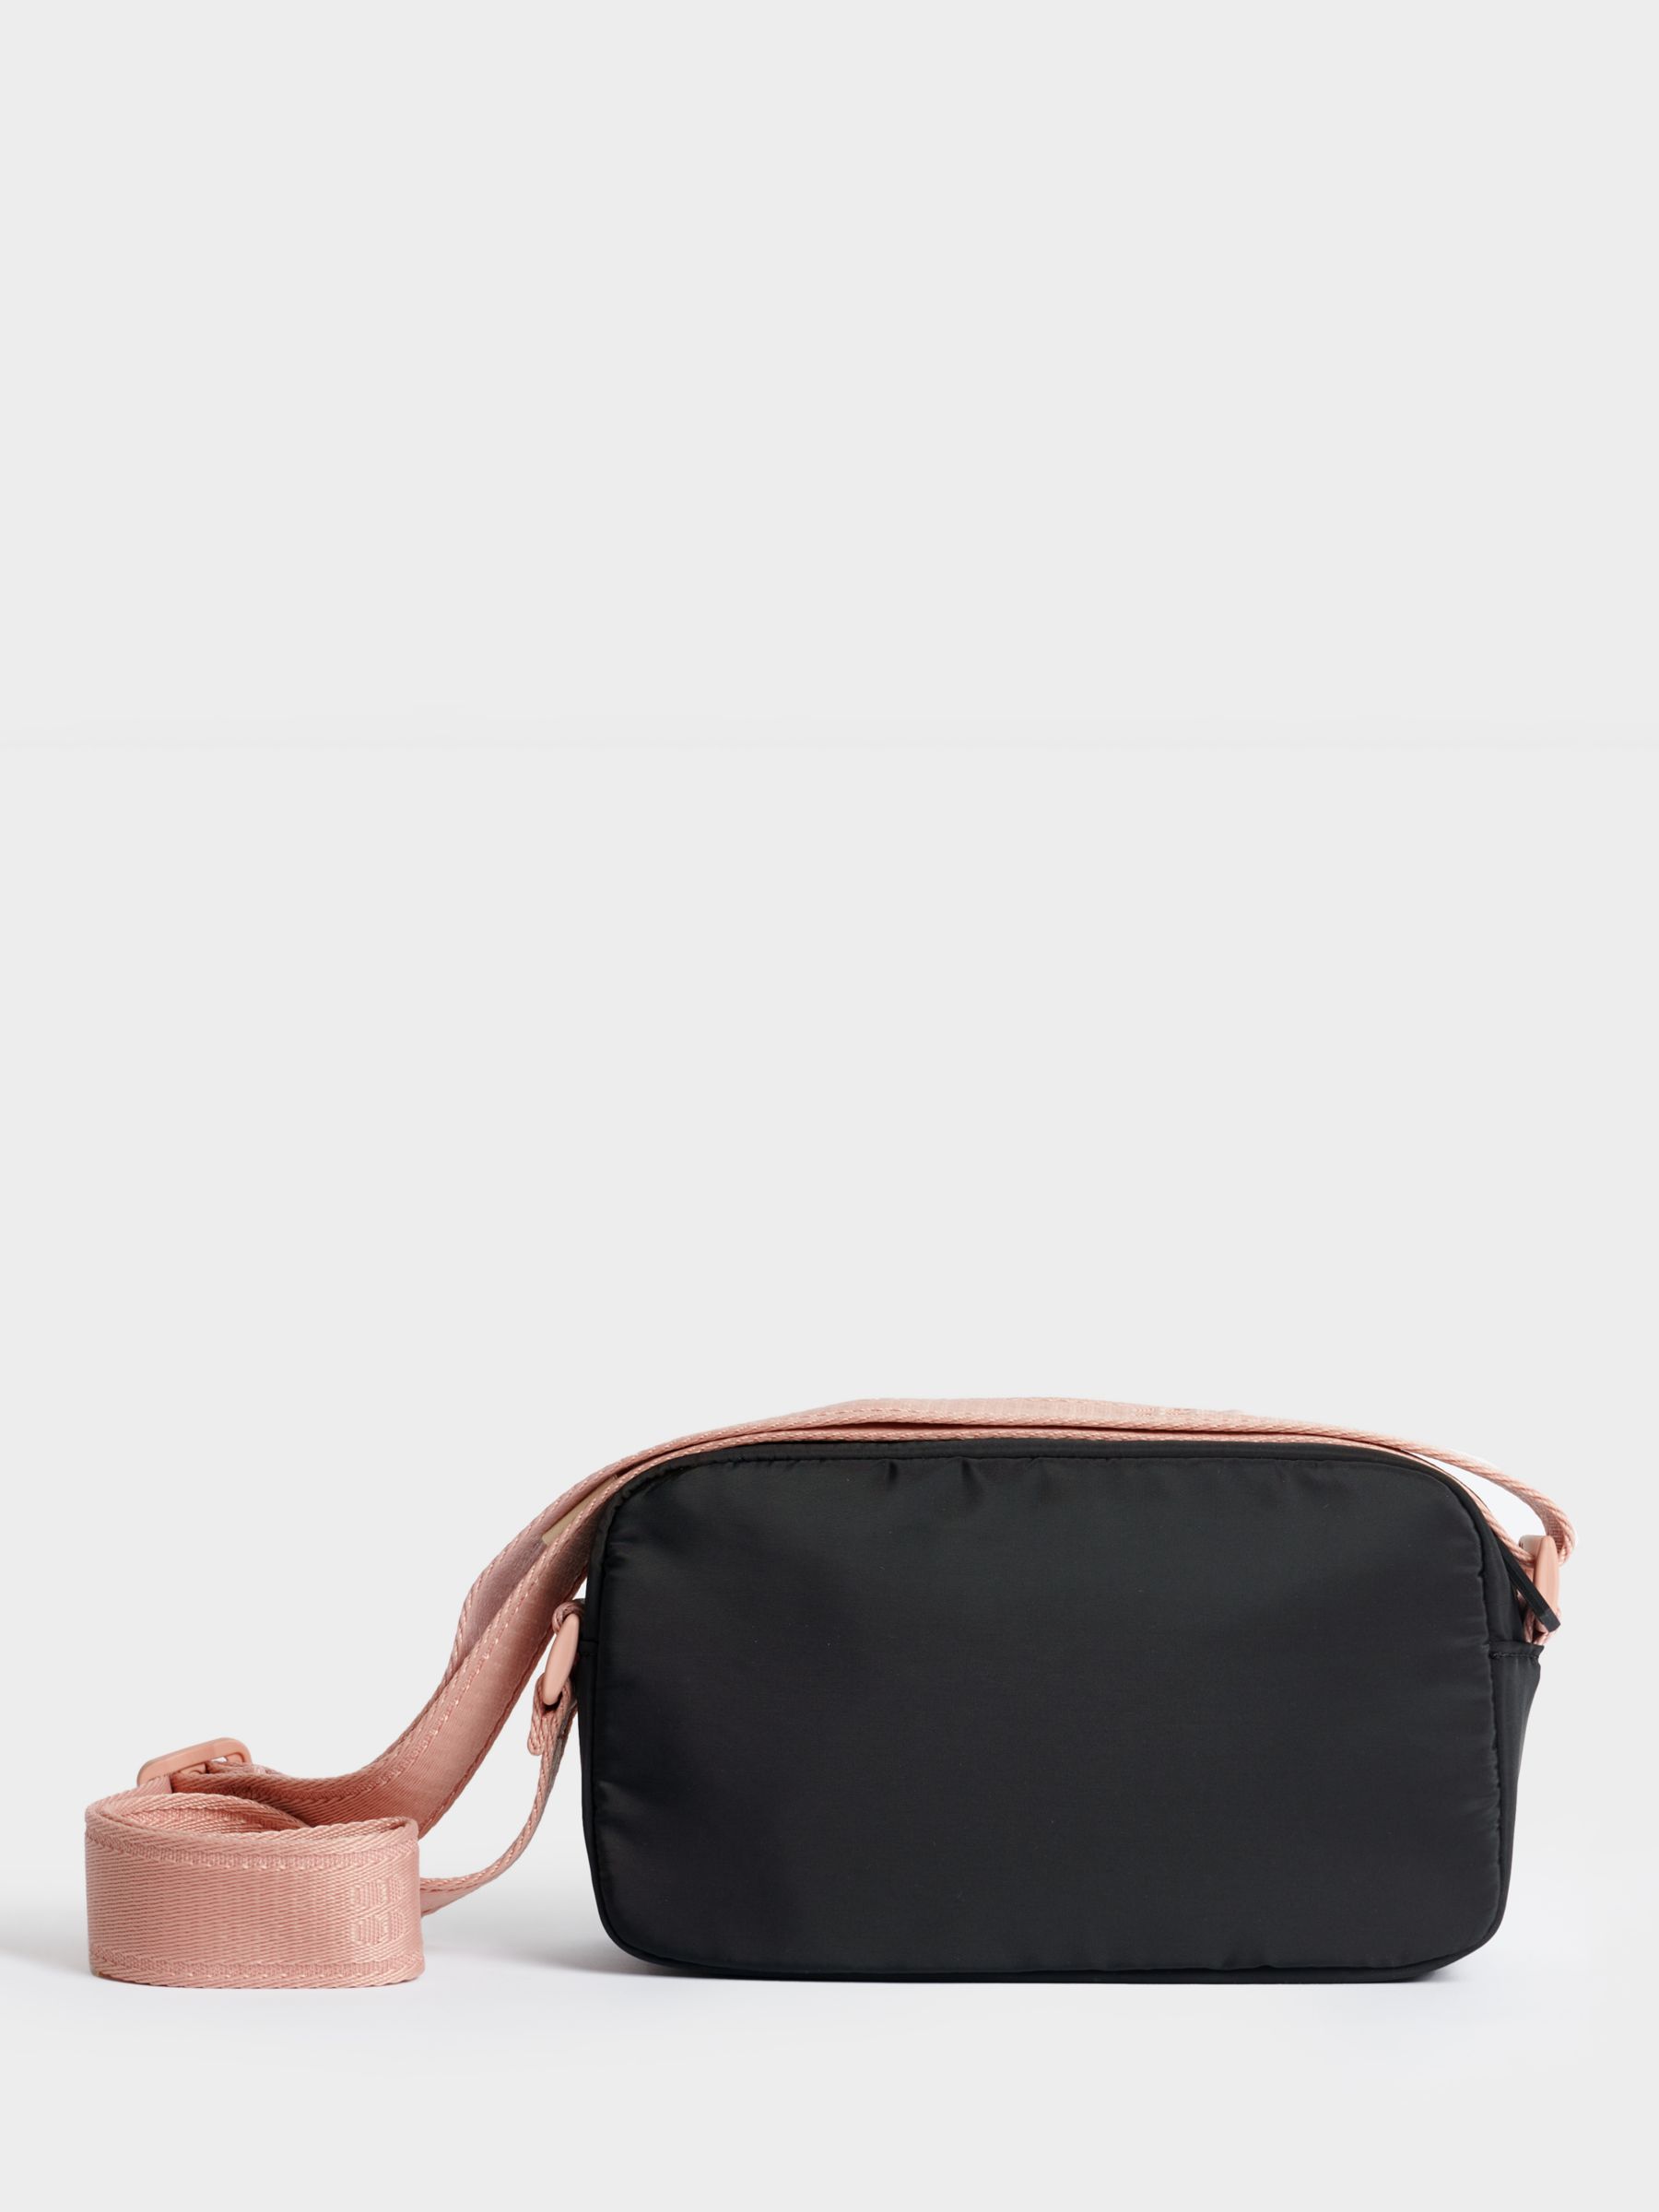 Buy Sweaty Betty All Day Cross Body Bag Online at johnlewis.com